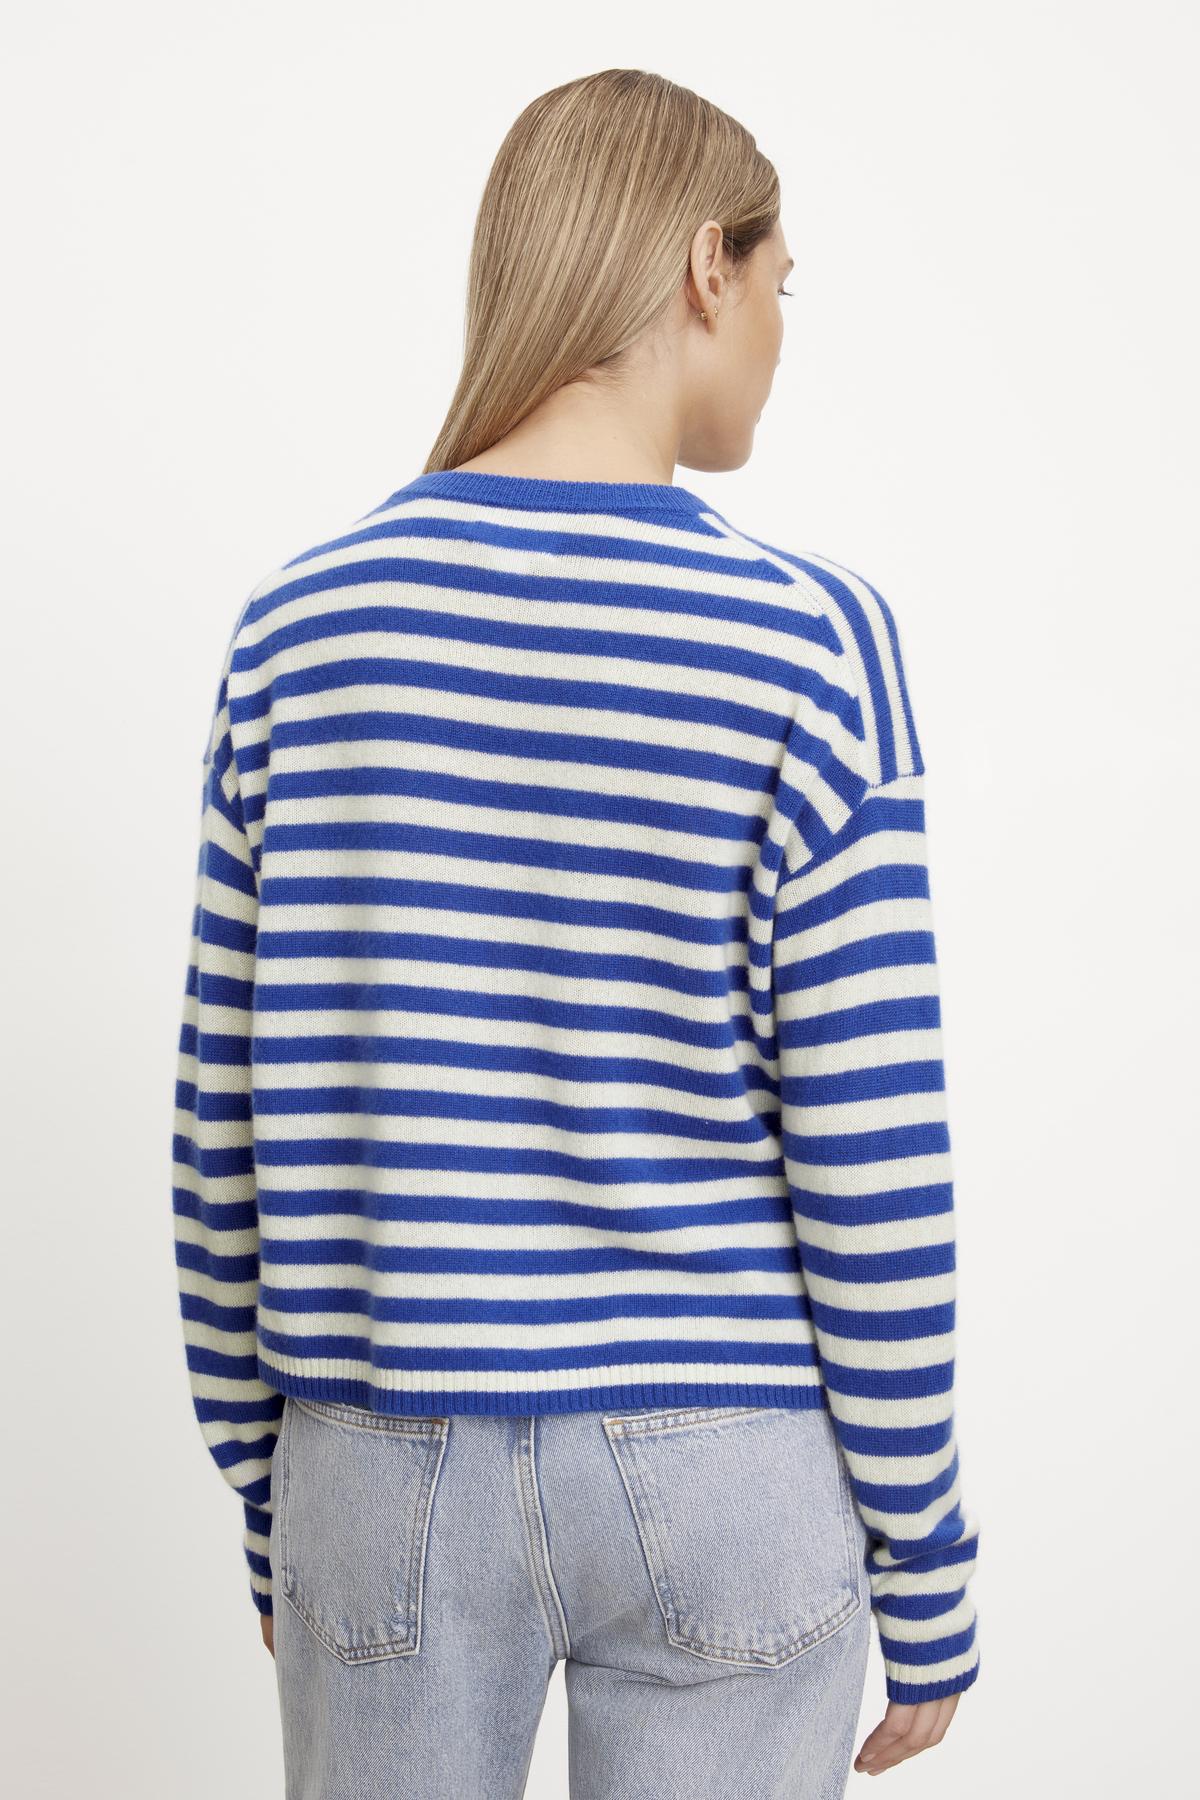 The back view of a woman wearing a Velvet by Graham & Spencer ALYSSA CASHMERE STRIPED CREW NECK SWEATER.-35702033187009